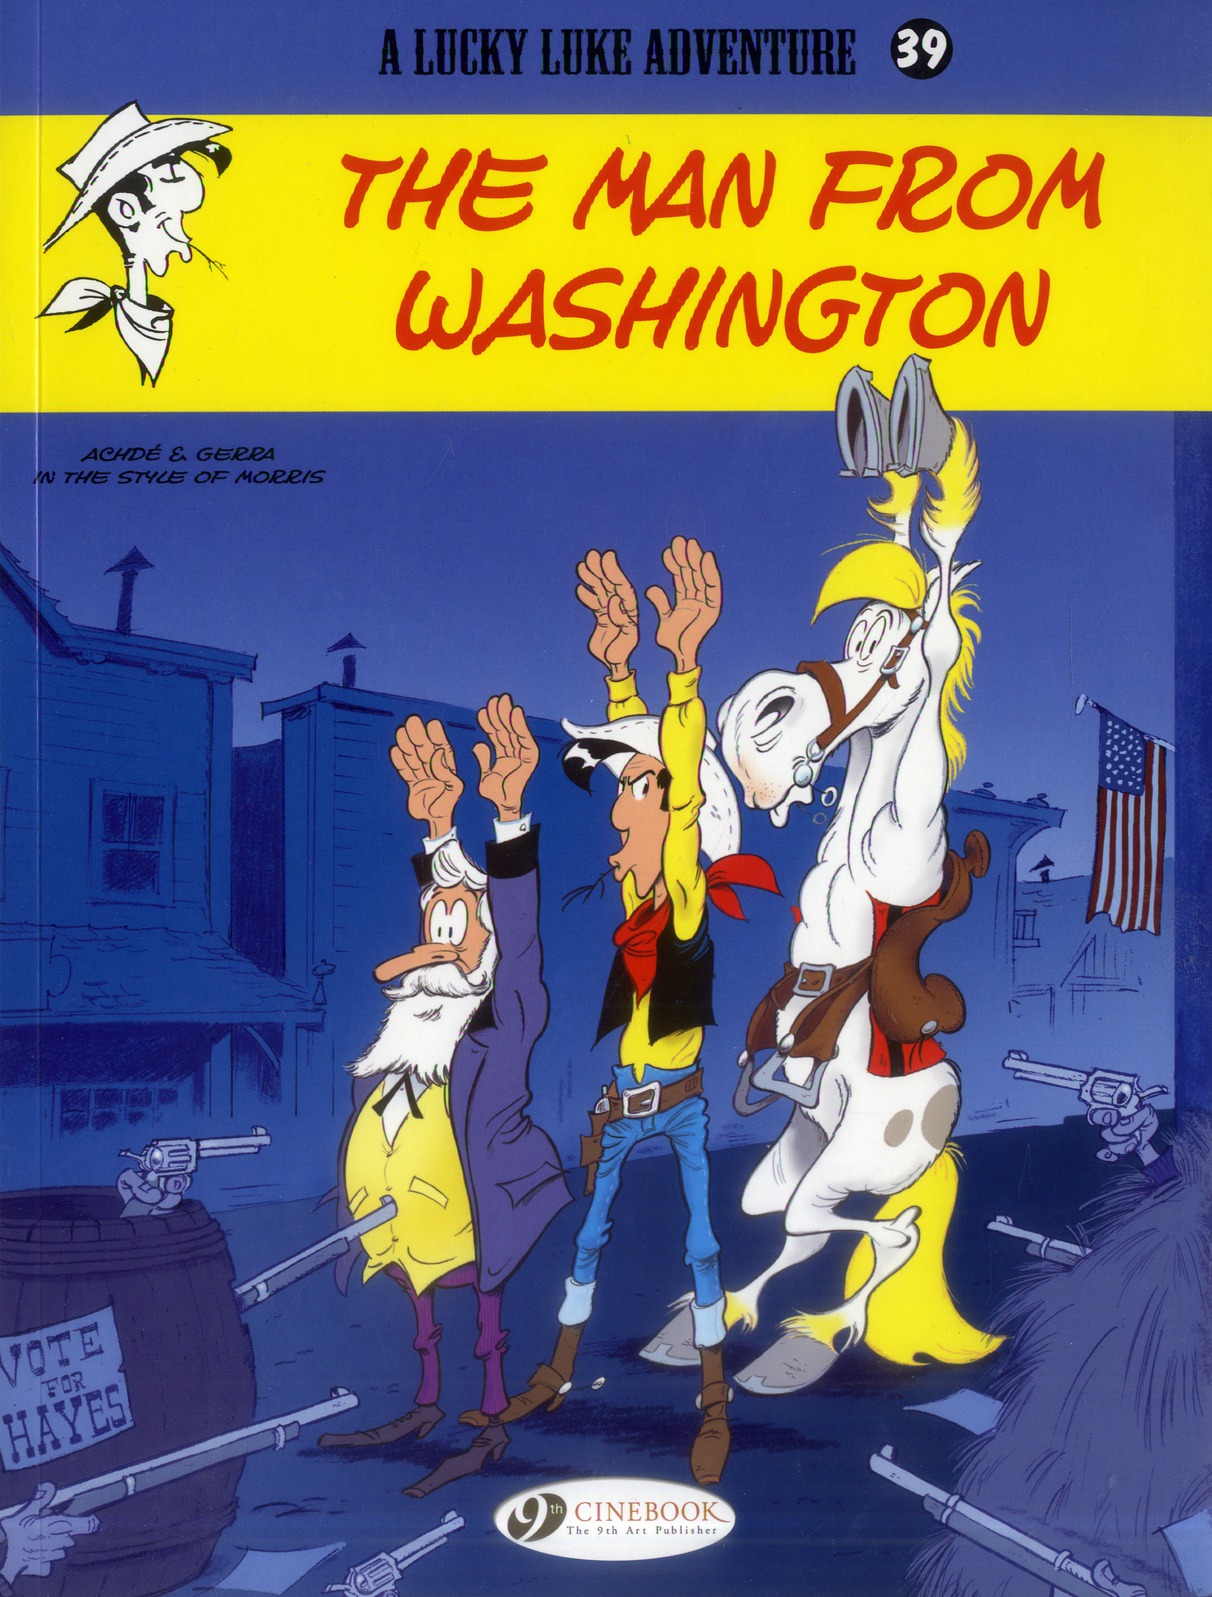 LUCKY LUKE - TOME 39 THE MAN FROM WASHINGTON - VOL39